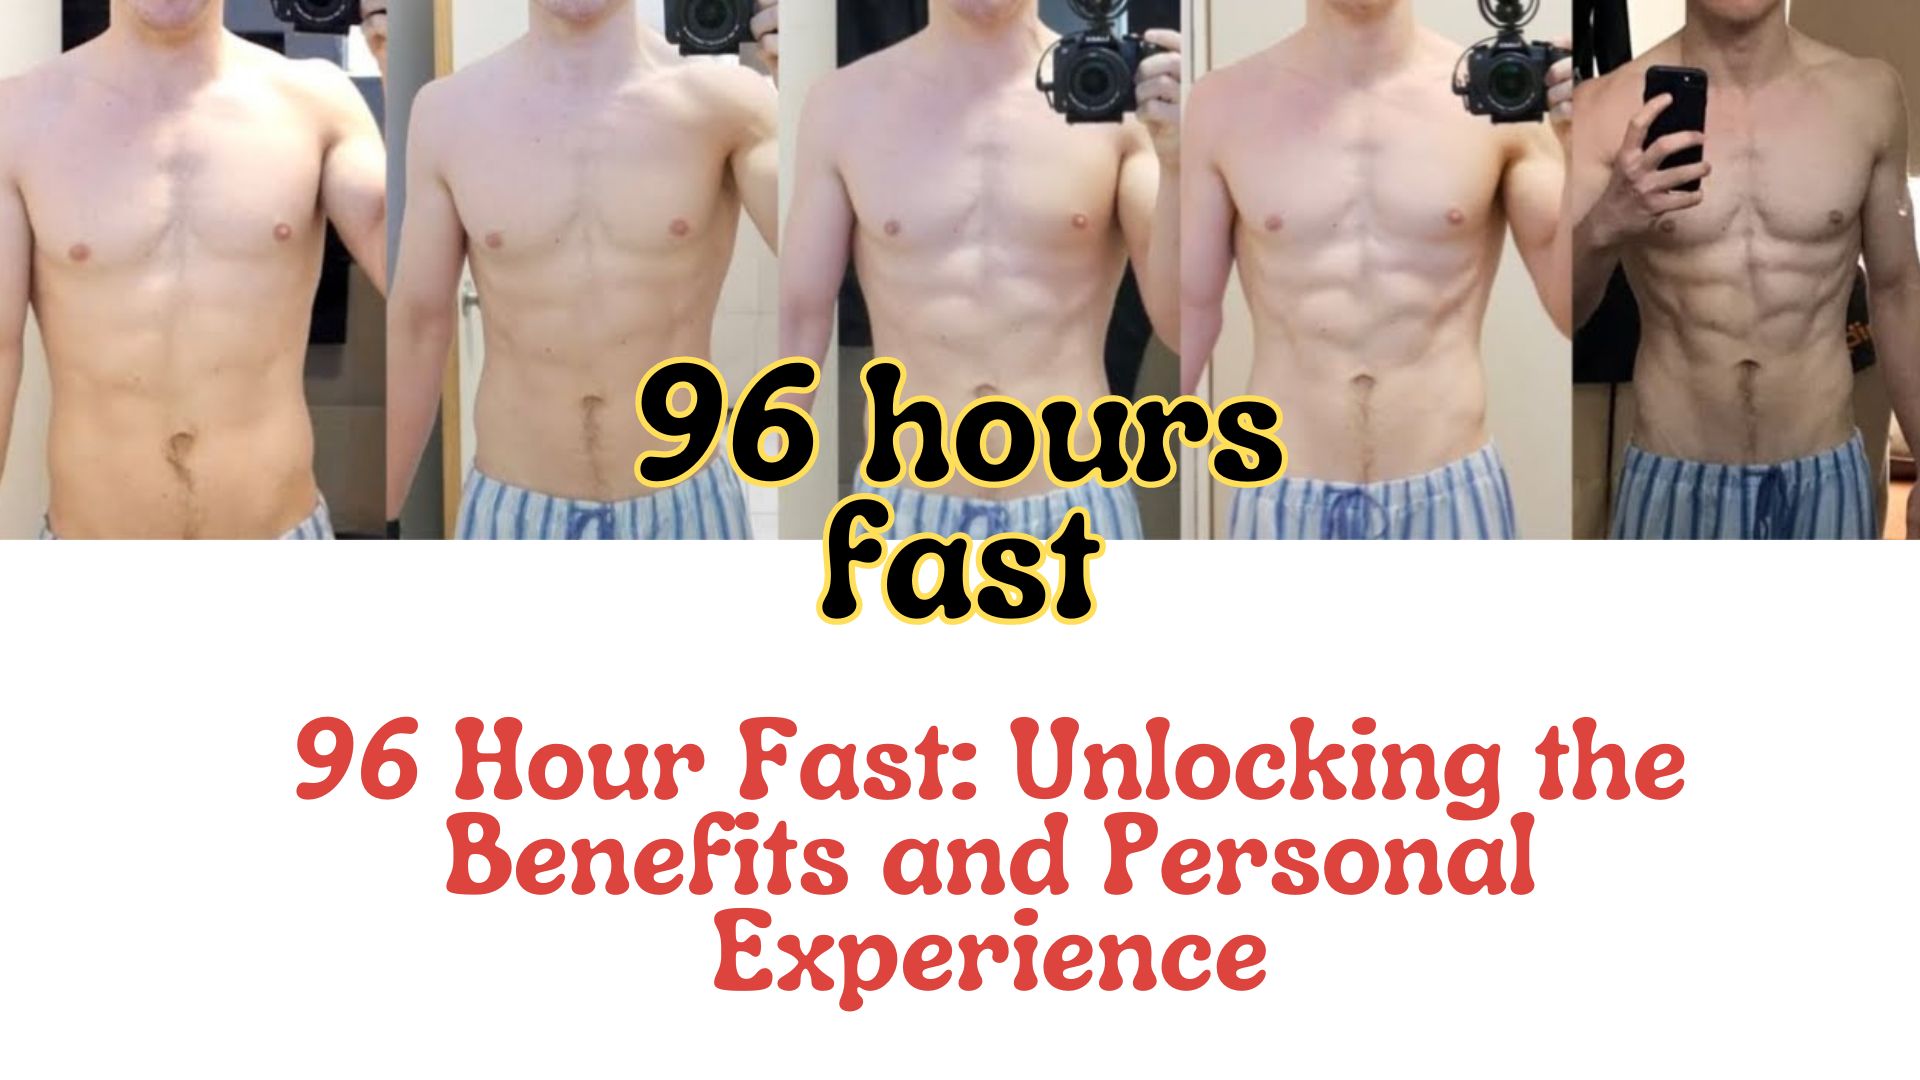 96 Hour Fast: Unlocking the Benefits and Personal Experience